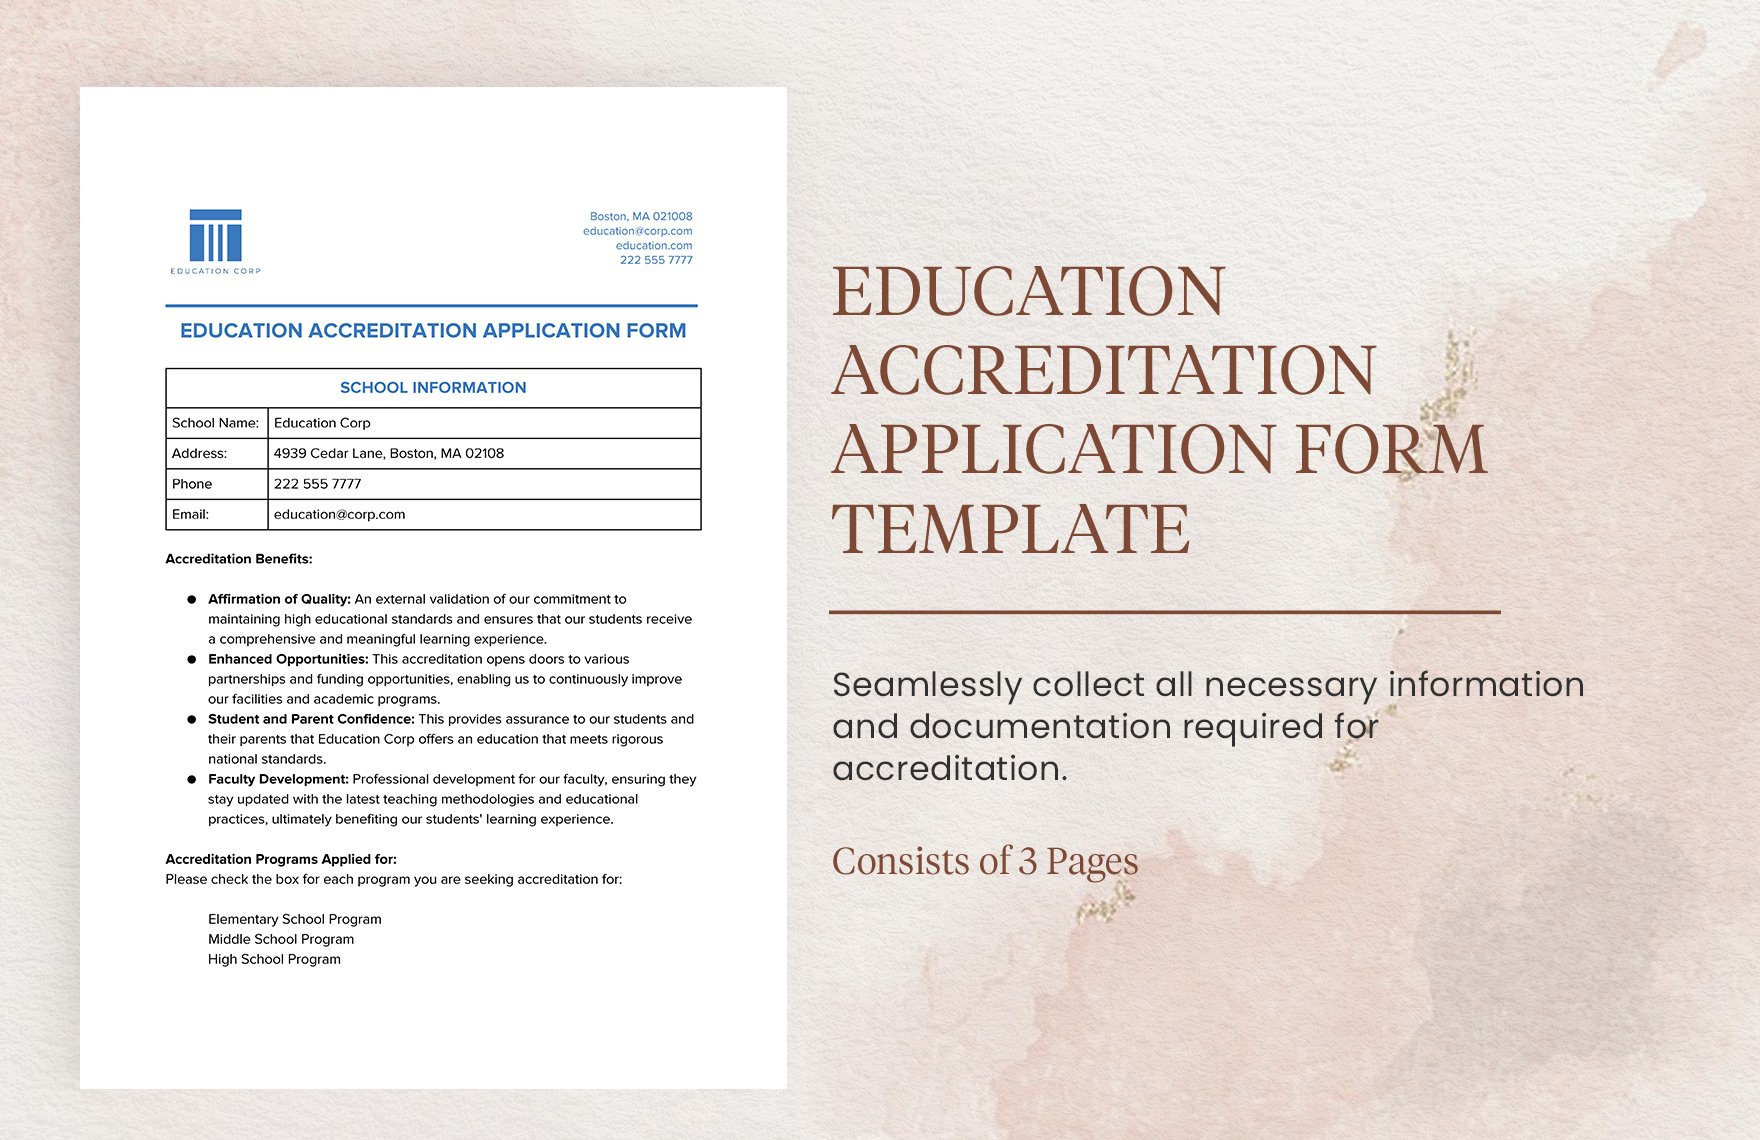 Education Accreditation Application Form Template in Word, Google Docs, PDF